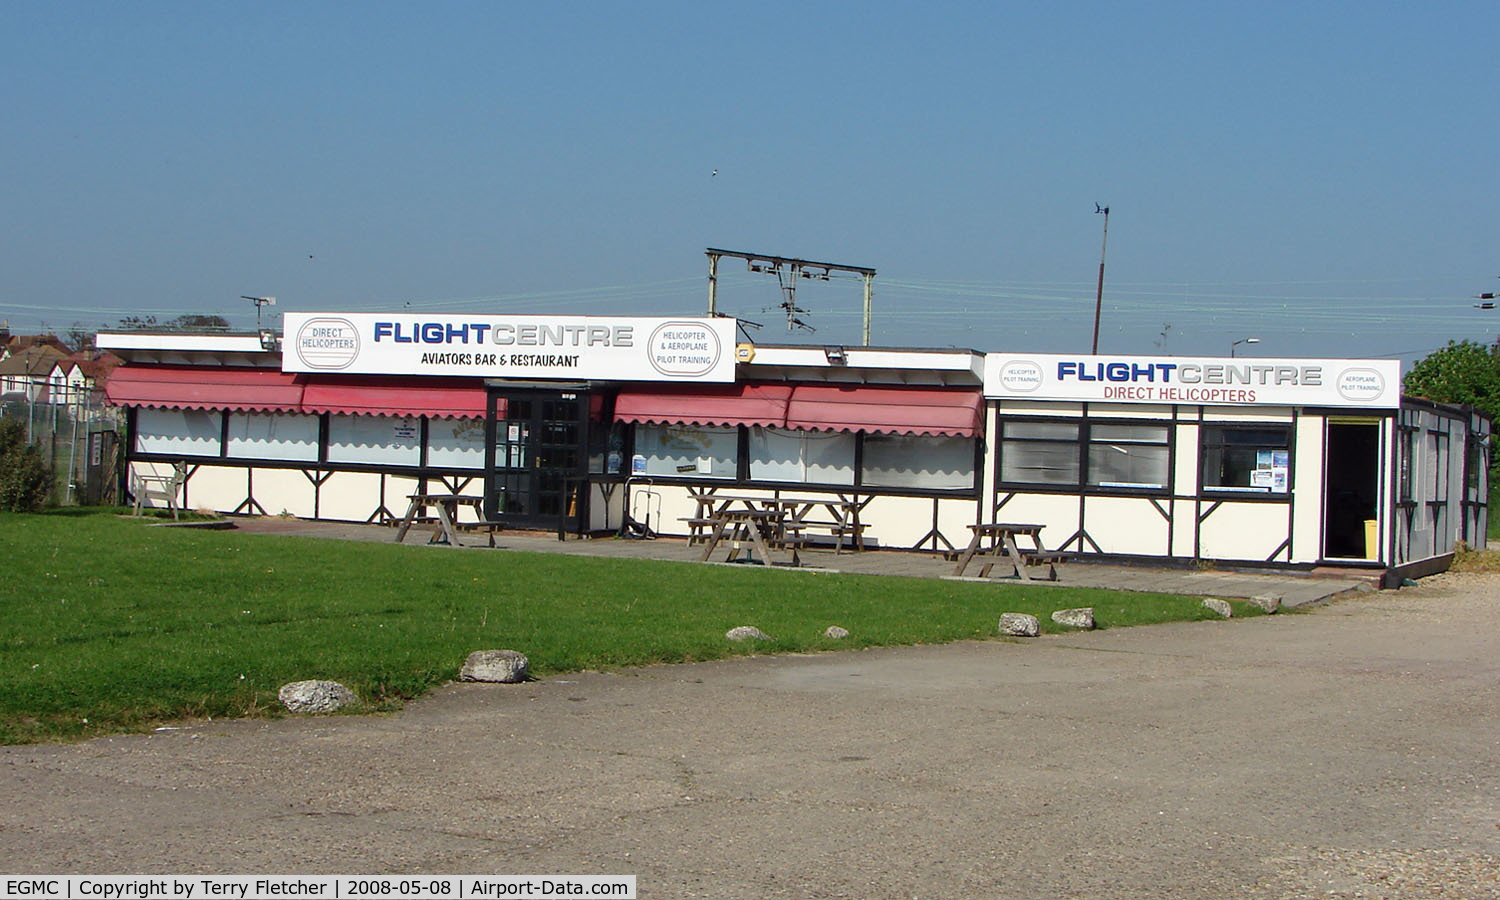 London Southend Airport, Southend-on-Sea, England United Kingdom (EGMC) - Flight Centre - Direct Helicopters , Aviators Bar and Restaurant on the Eastern side of Southend Airport